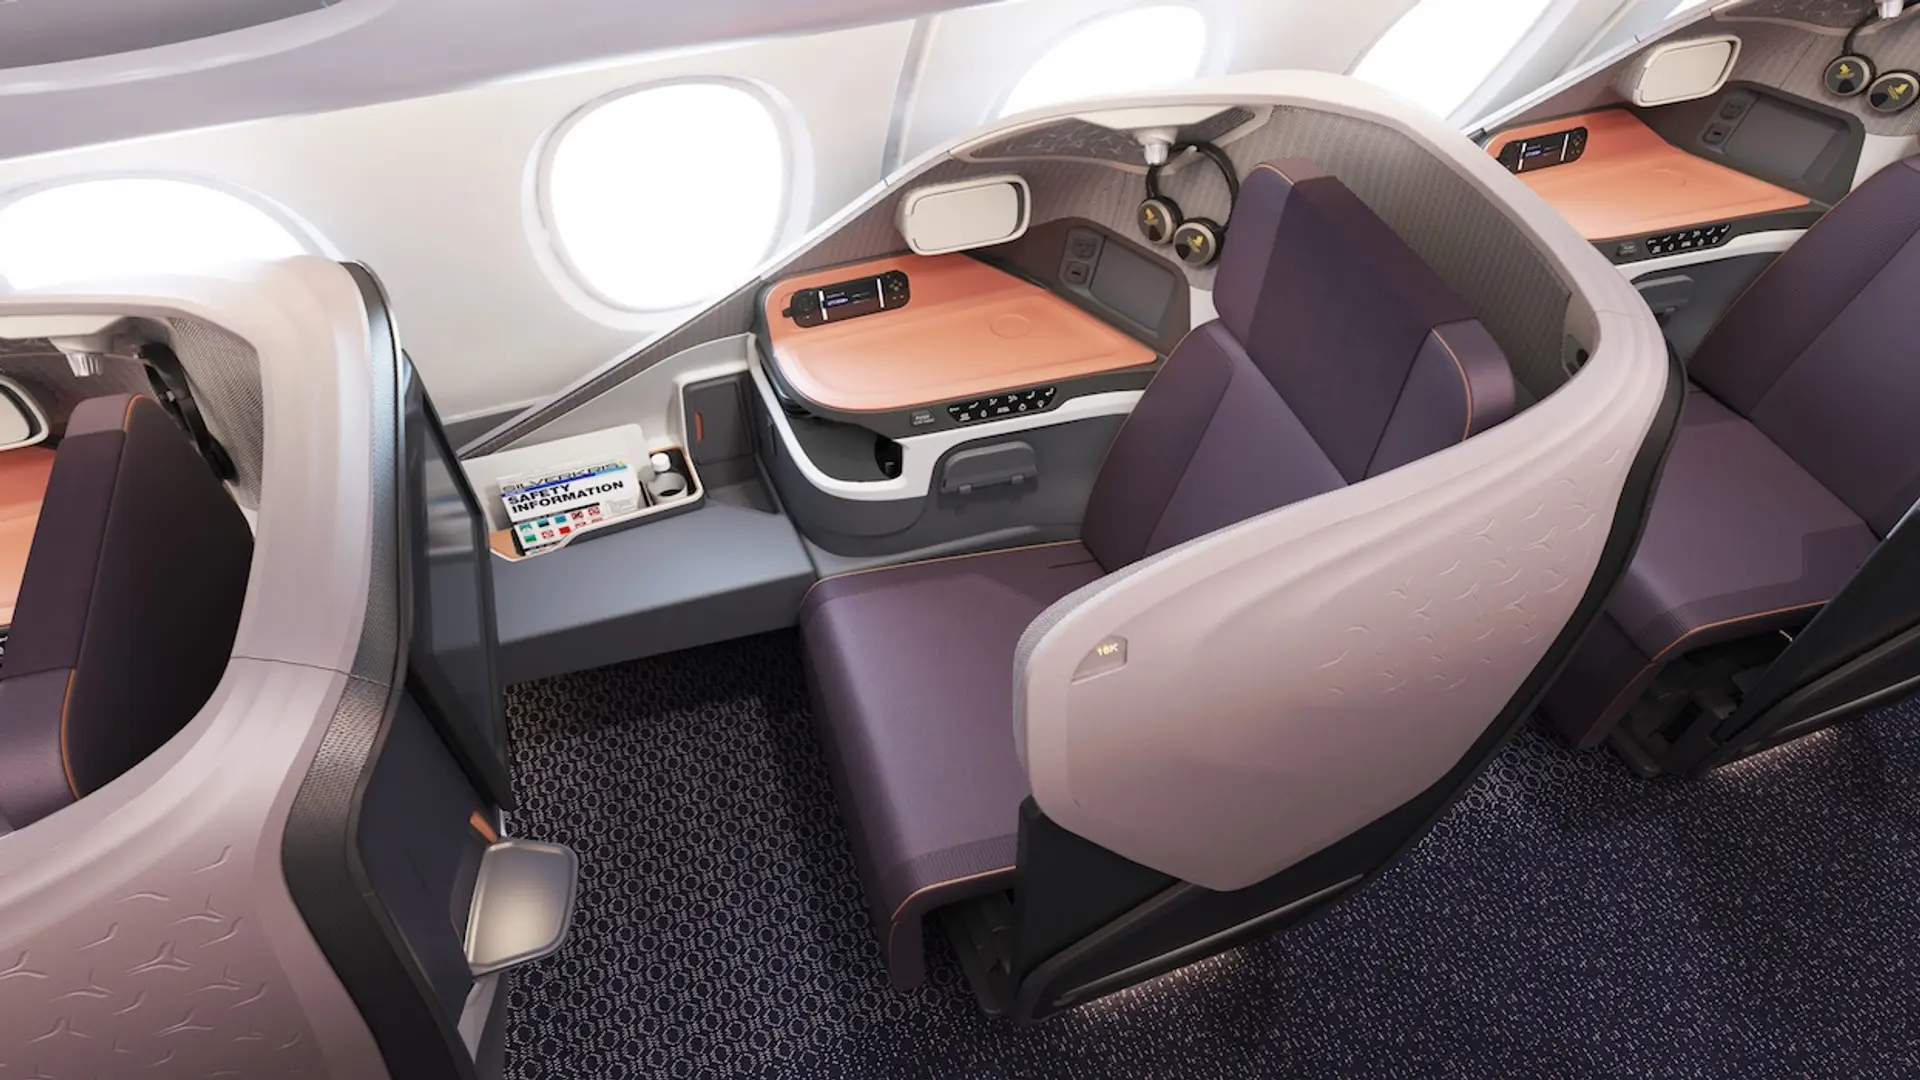 Airline review Cabin & Seat - Singapore Airlines - 8